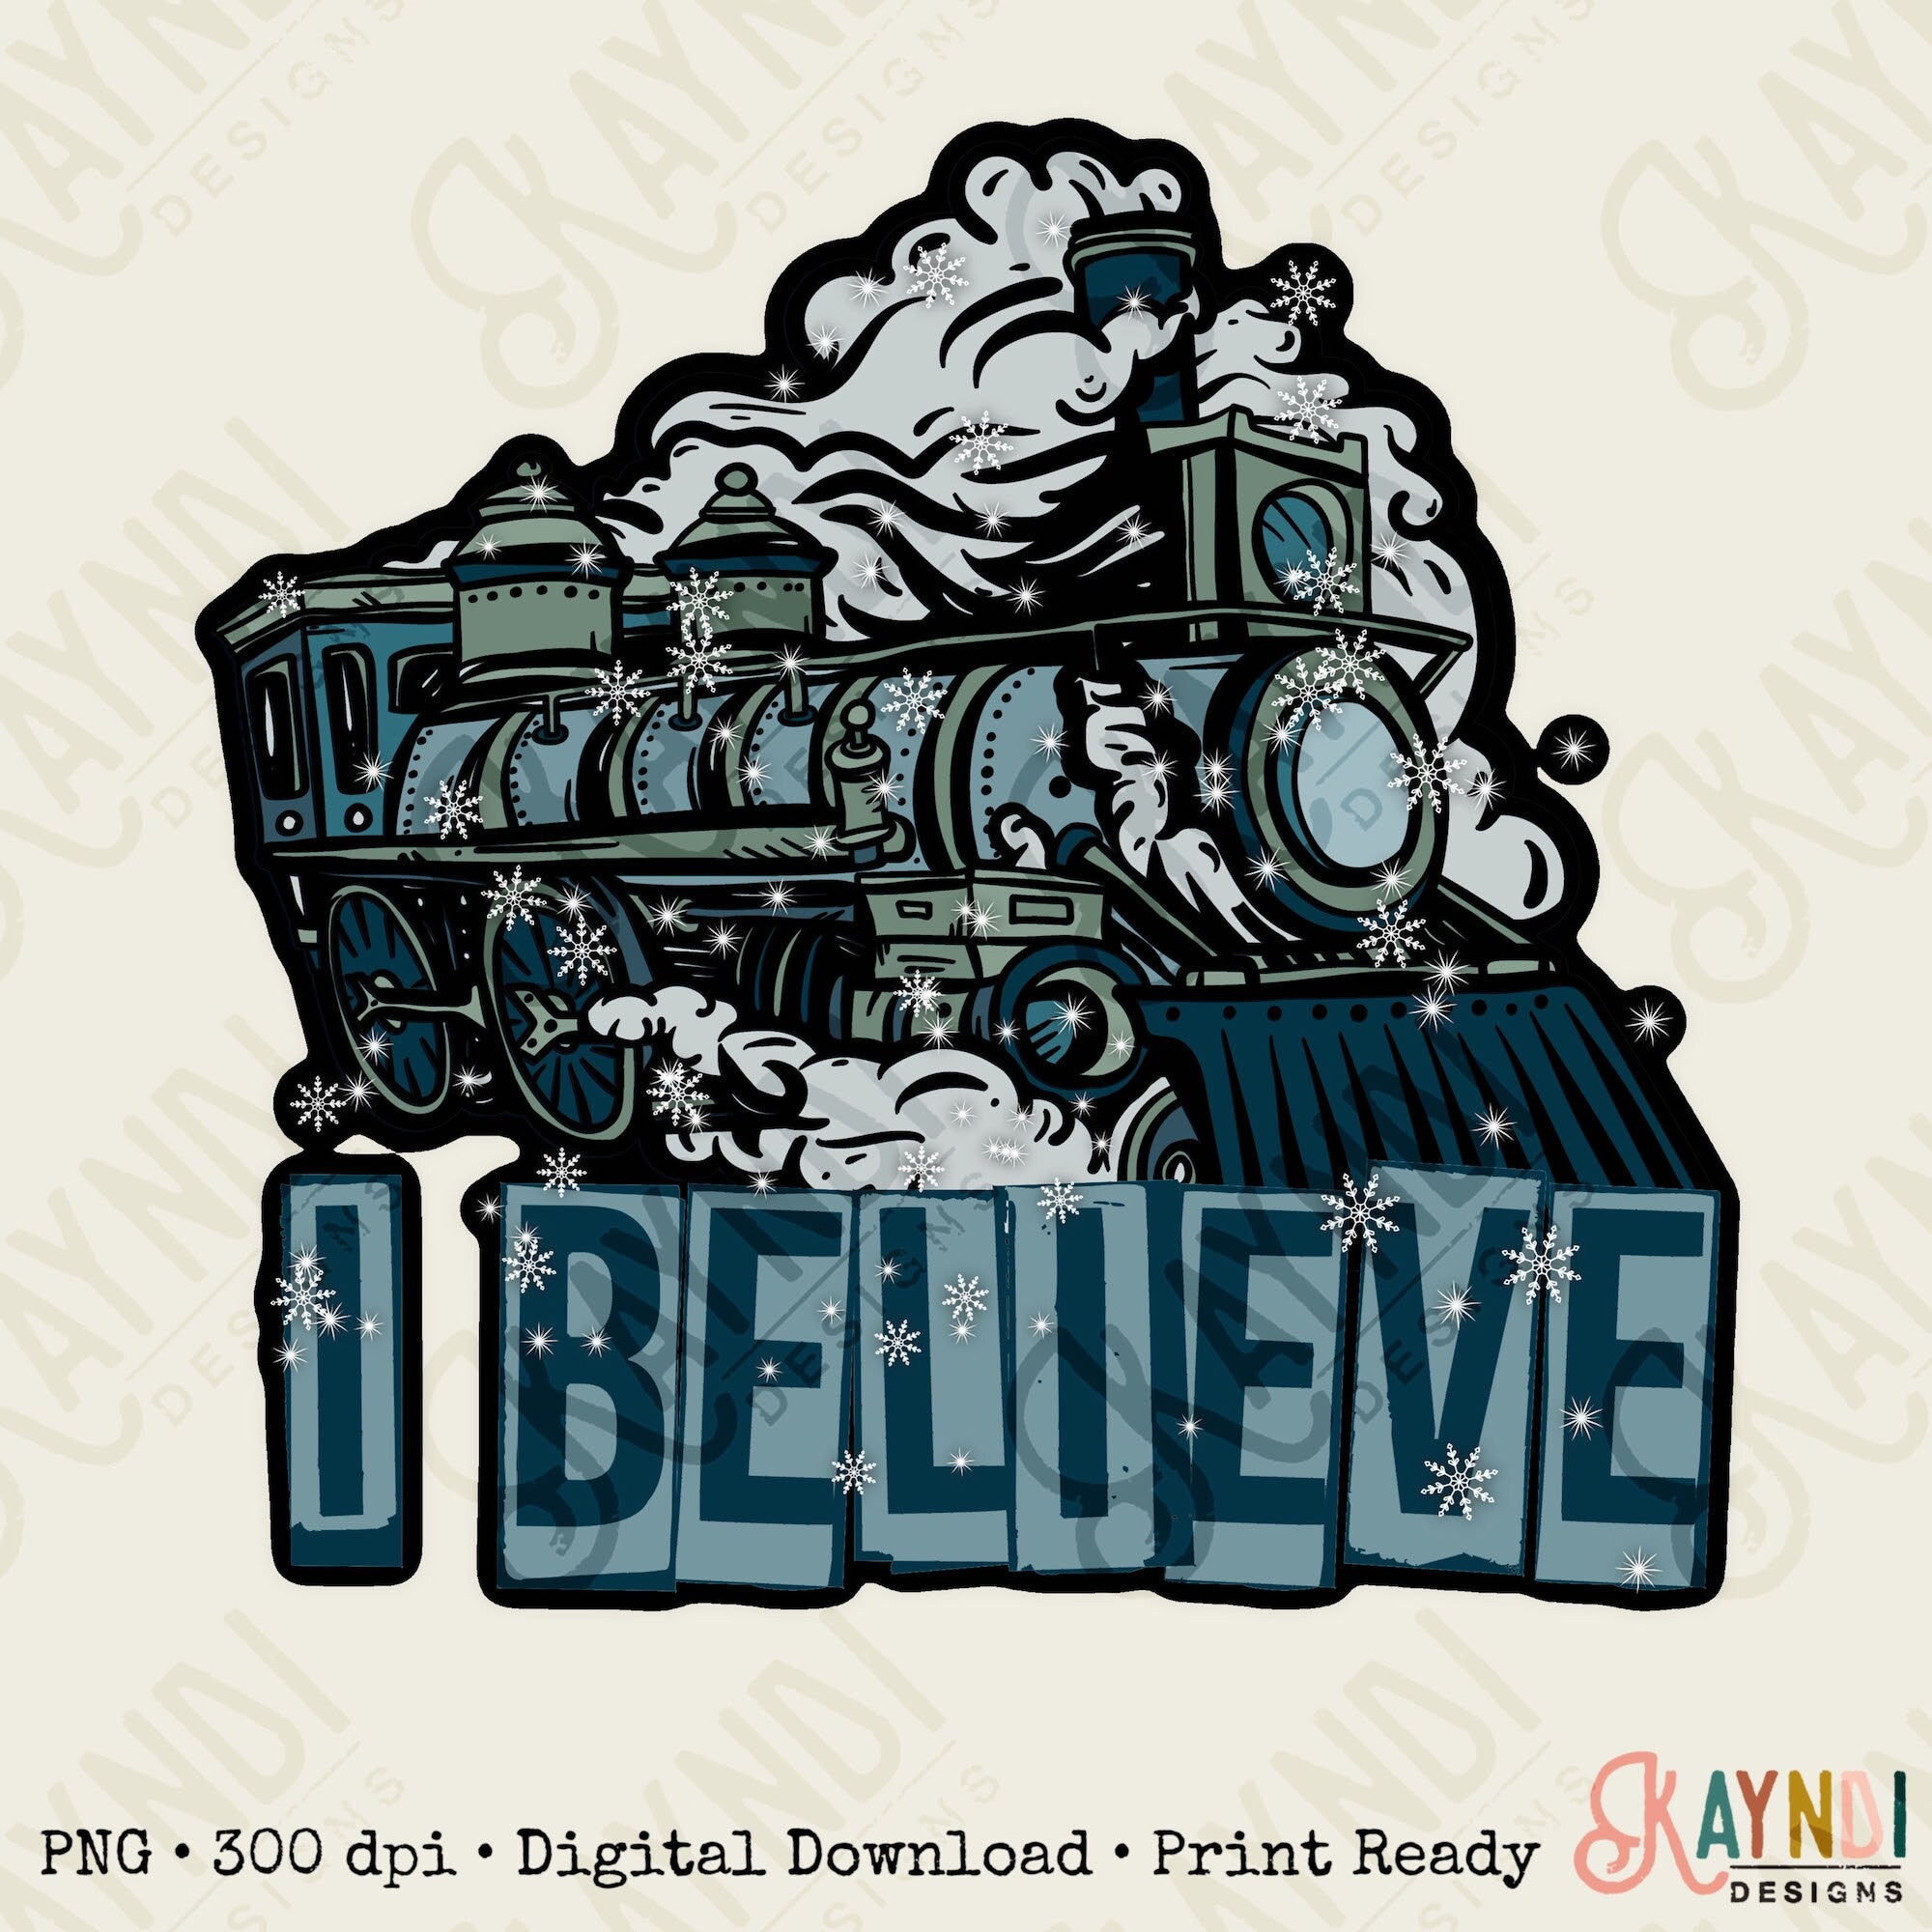 I Believe Train Sublimation Design PNG Digital Download Printable Santa Christmas Express North Pole Polar Winter Snowflakes Quote Saying